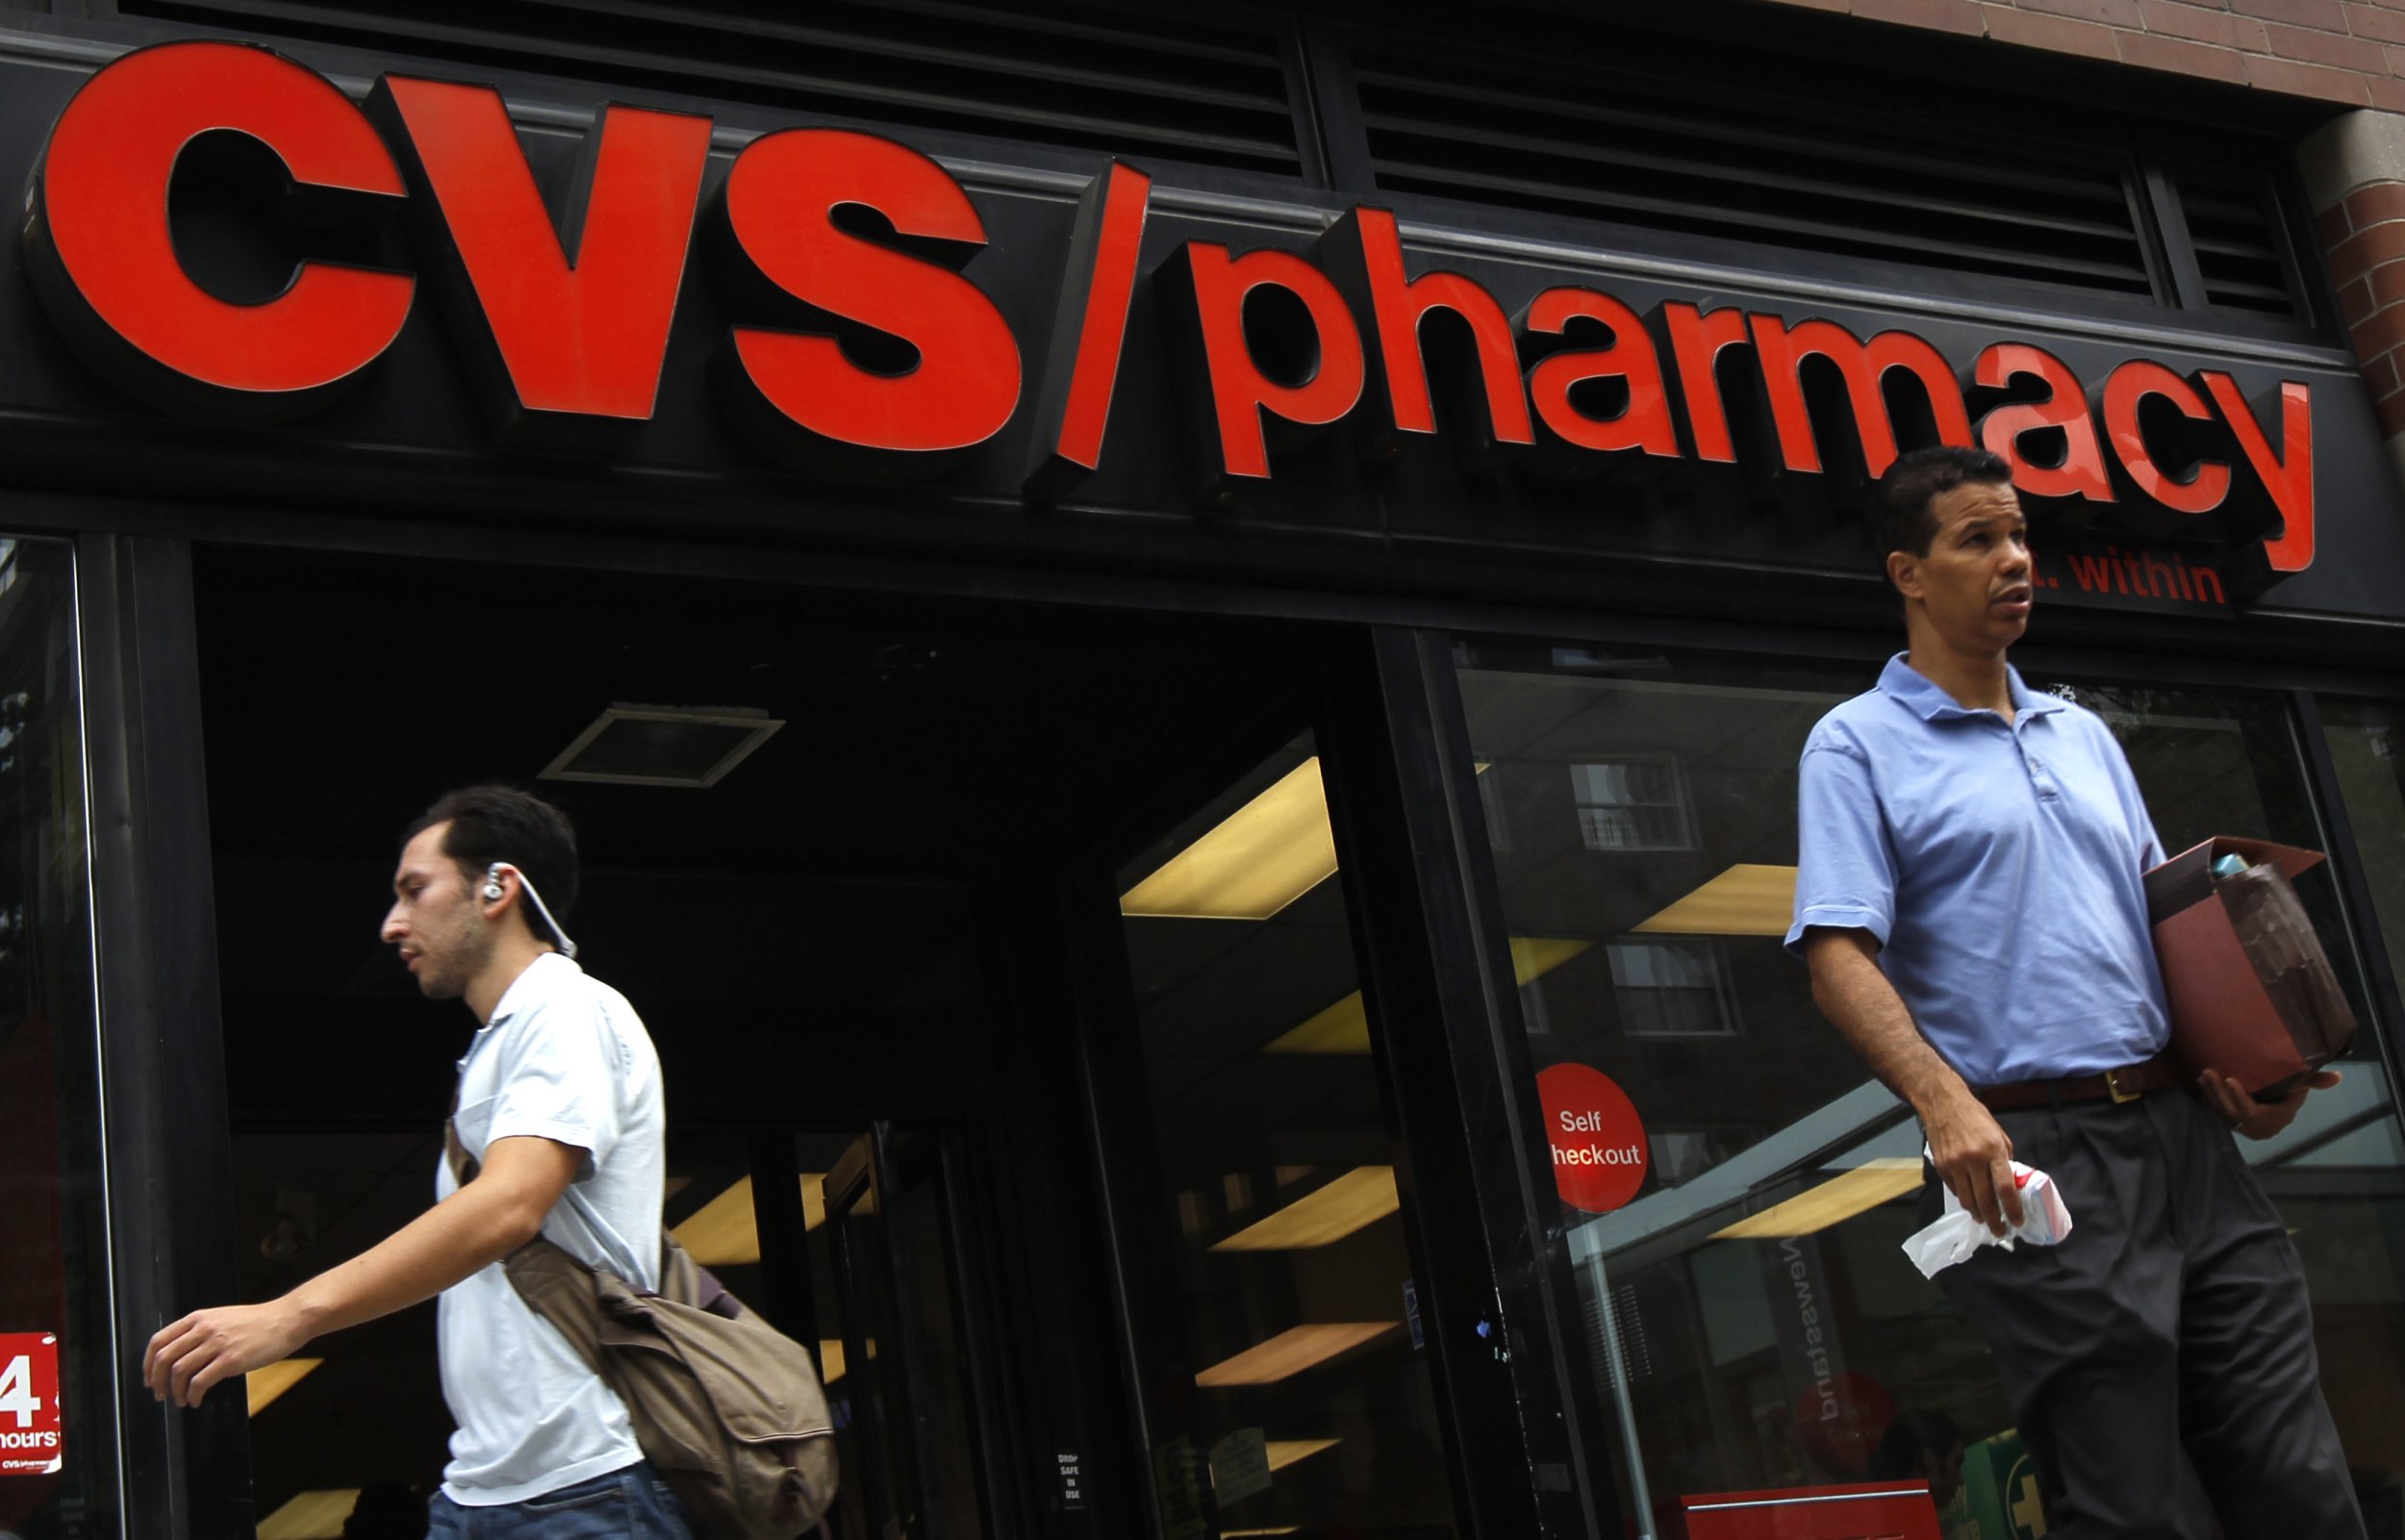 CVS Store Closures Why The Retailer Is Closing Locations Amid Revenue